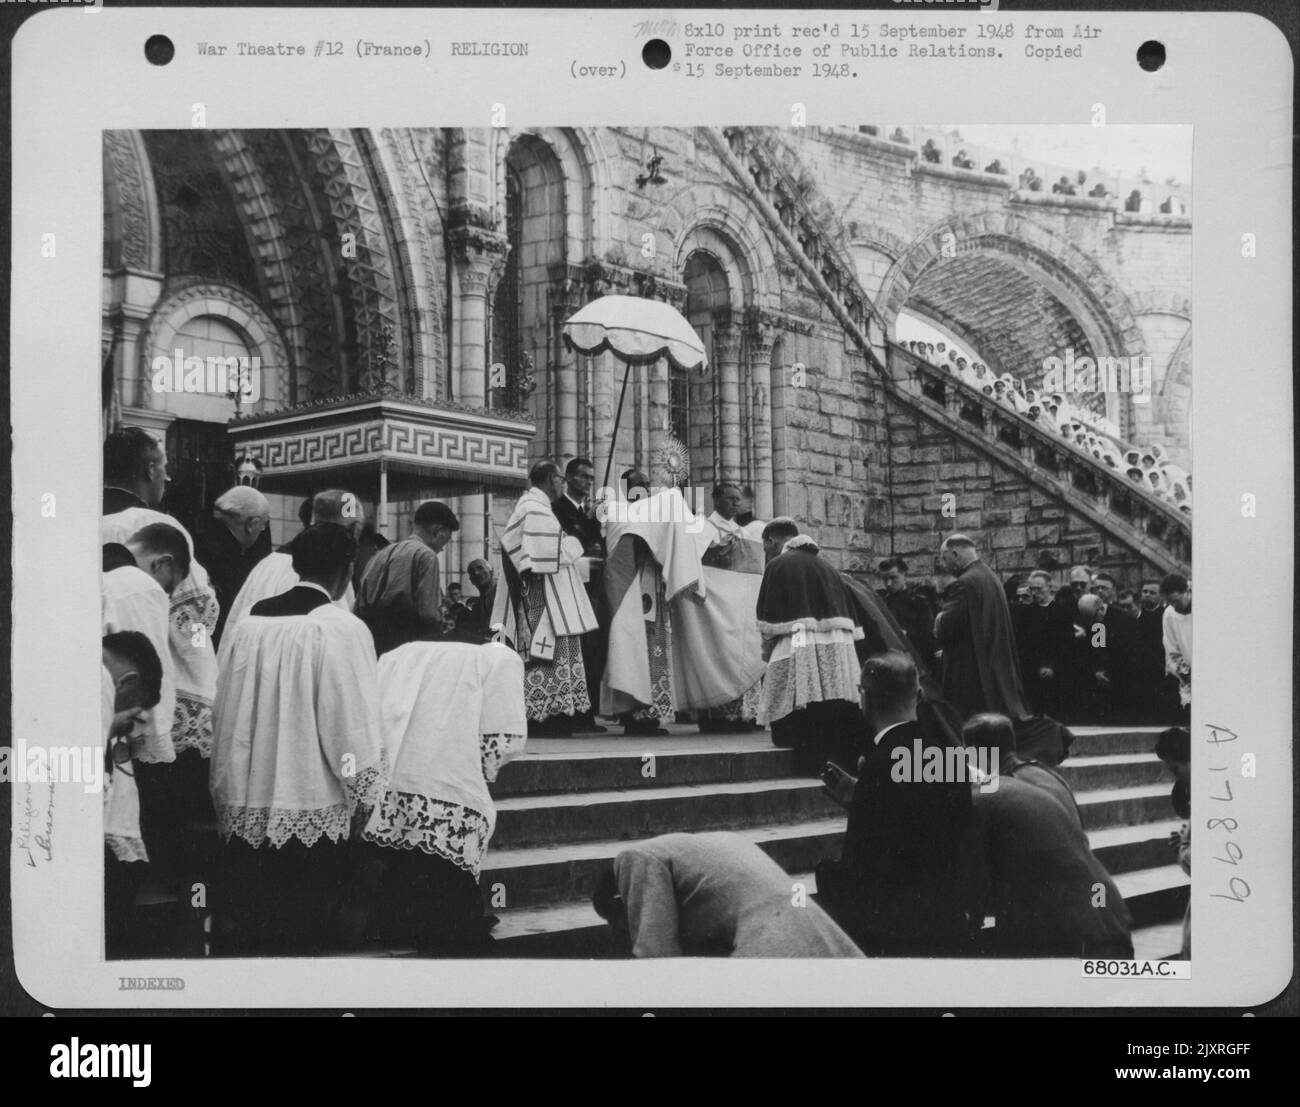 After Parading Through The Streets Of Lourdes, Past Lines Of Sick And Crippled Pilgrims Who Came To The World Famous Shrine Hoping To Be Cured, Worshippers Gather Before Rosary Church, To Receive The Final Blessing By Chaplain (Major ) Stephen A. Tatar Of Stock Photo